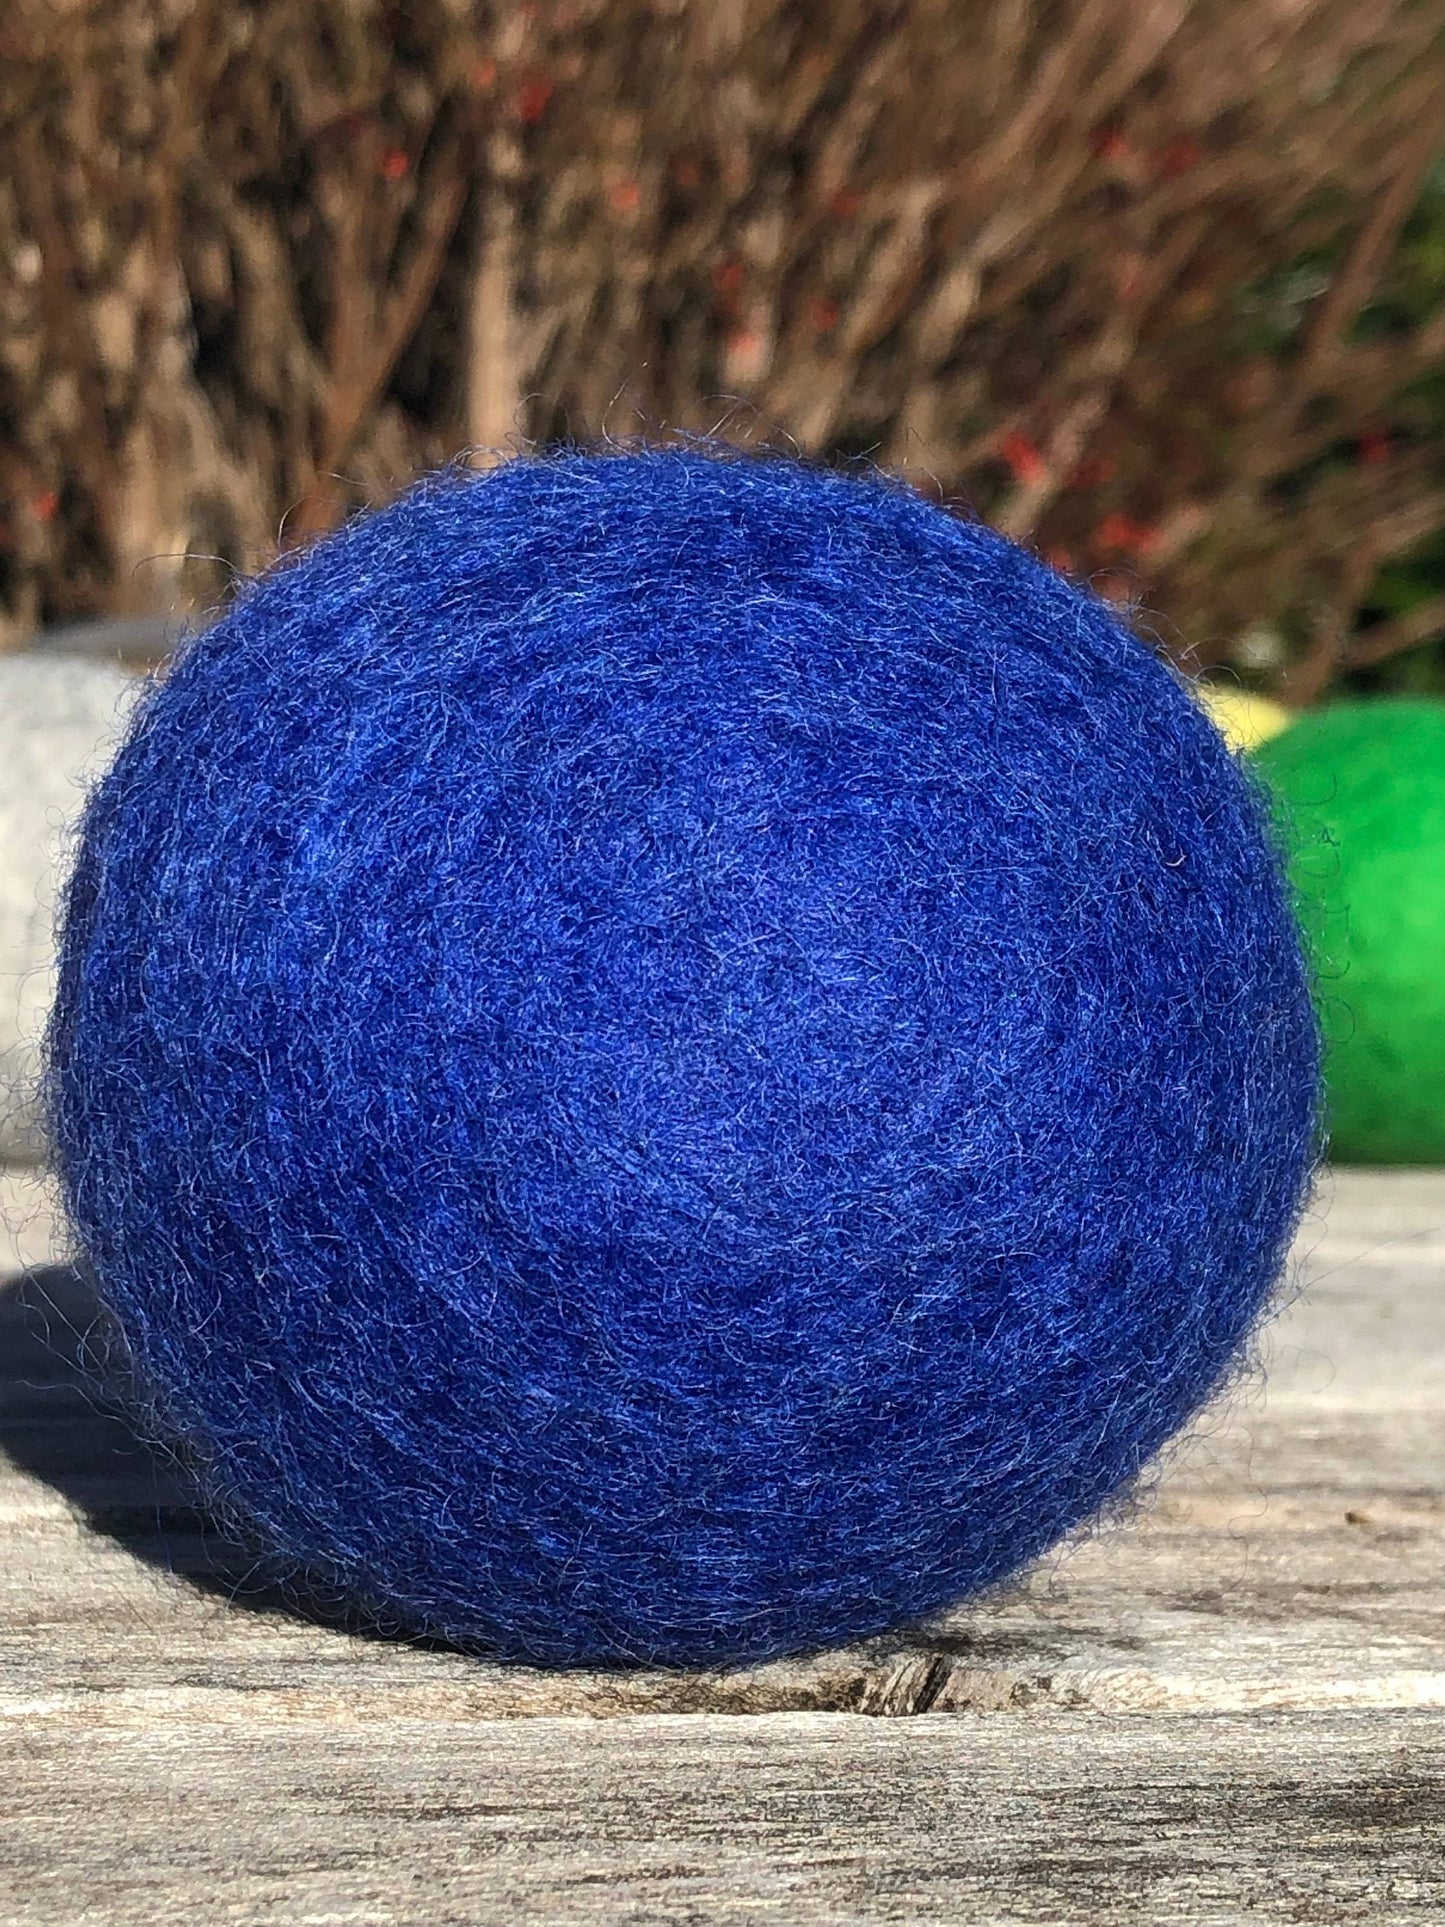 Wool Dryer Balls  XL Natural Laundry Softener,  Natural Eco Friendly with no chemicals - XL - Organic & Baby Safe